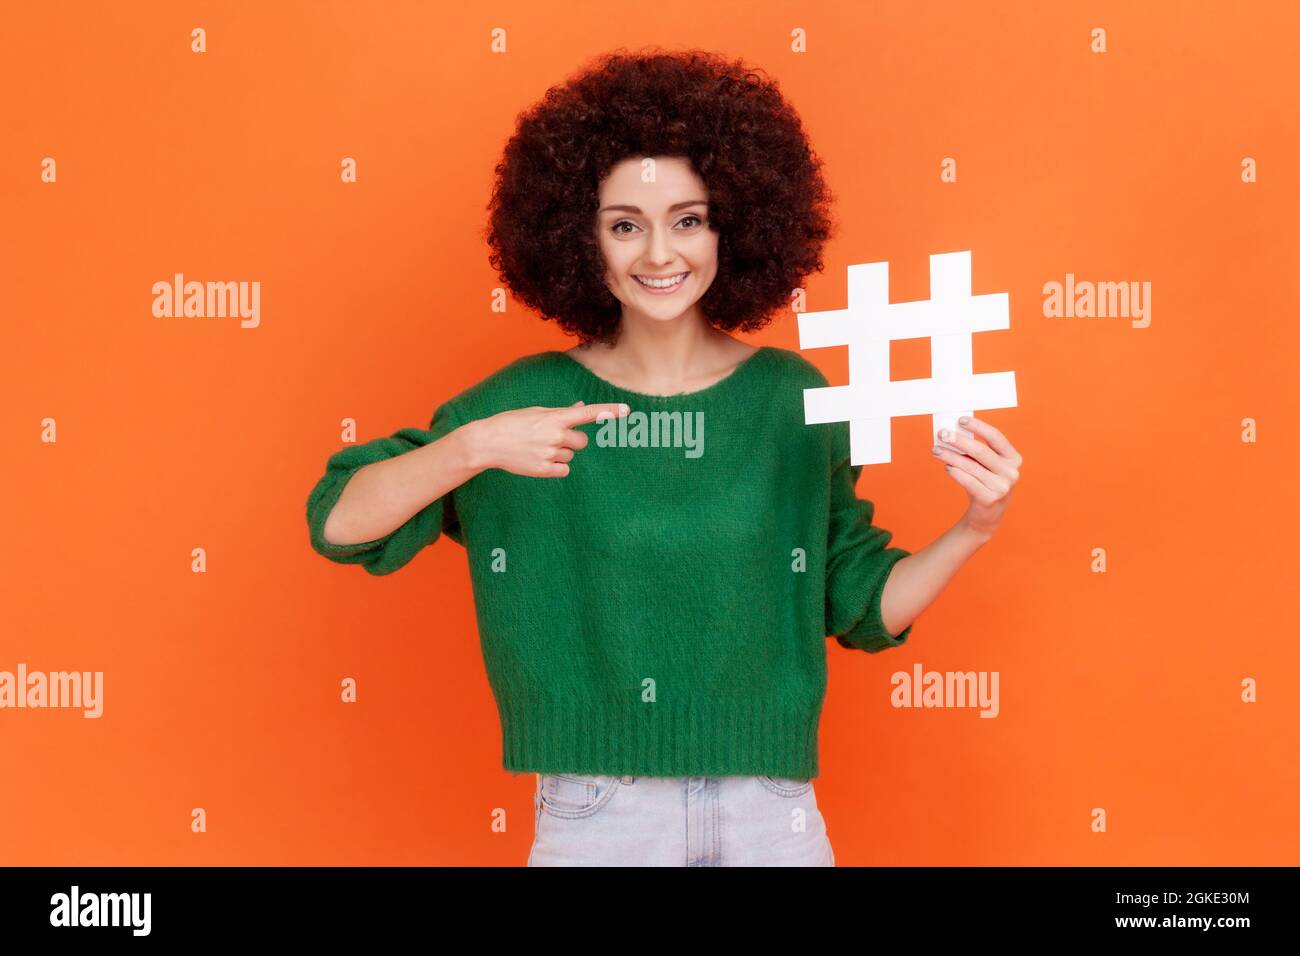 Viral hashtag and successful blogging. Smiling woman with Afro hairstyle wearing green casual style sweater pointing at large white hash symbol. Indoo Stock Photo